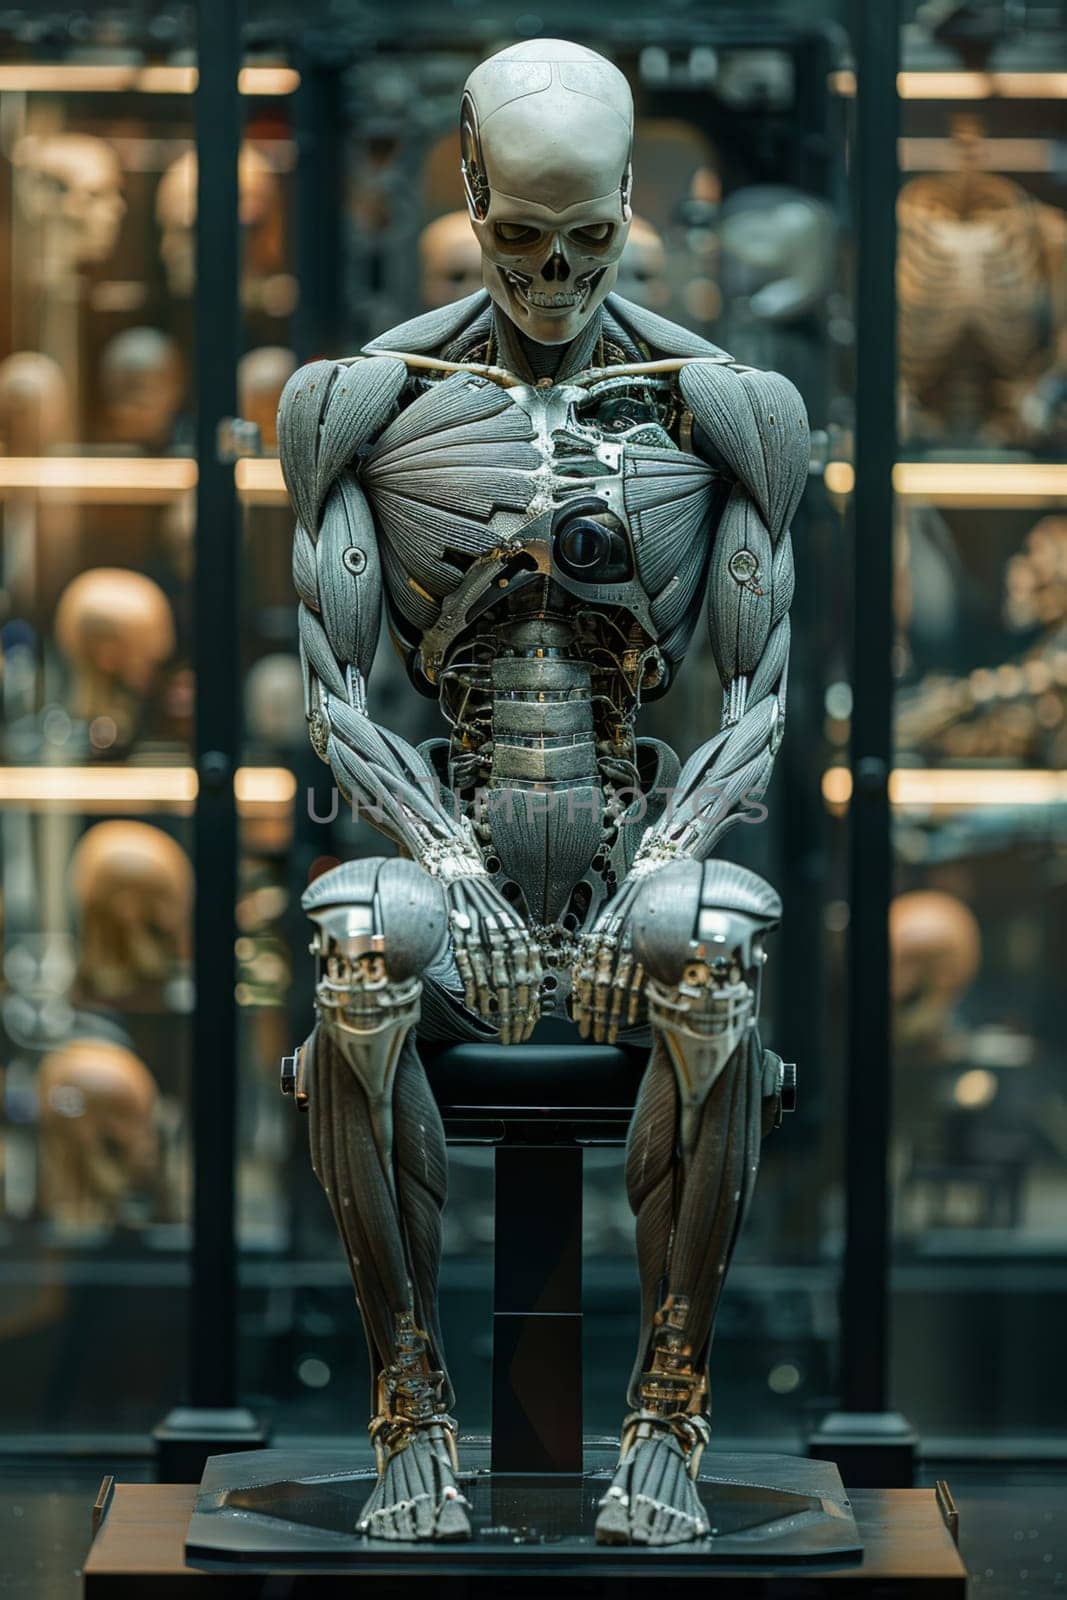 The skeletal structure of the human body. Biohacking by Lobachad